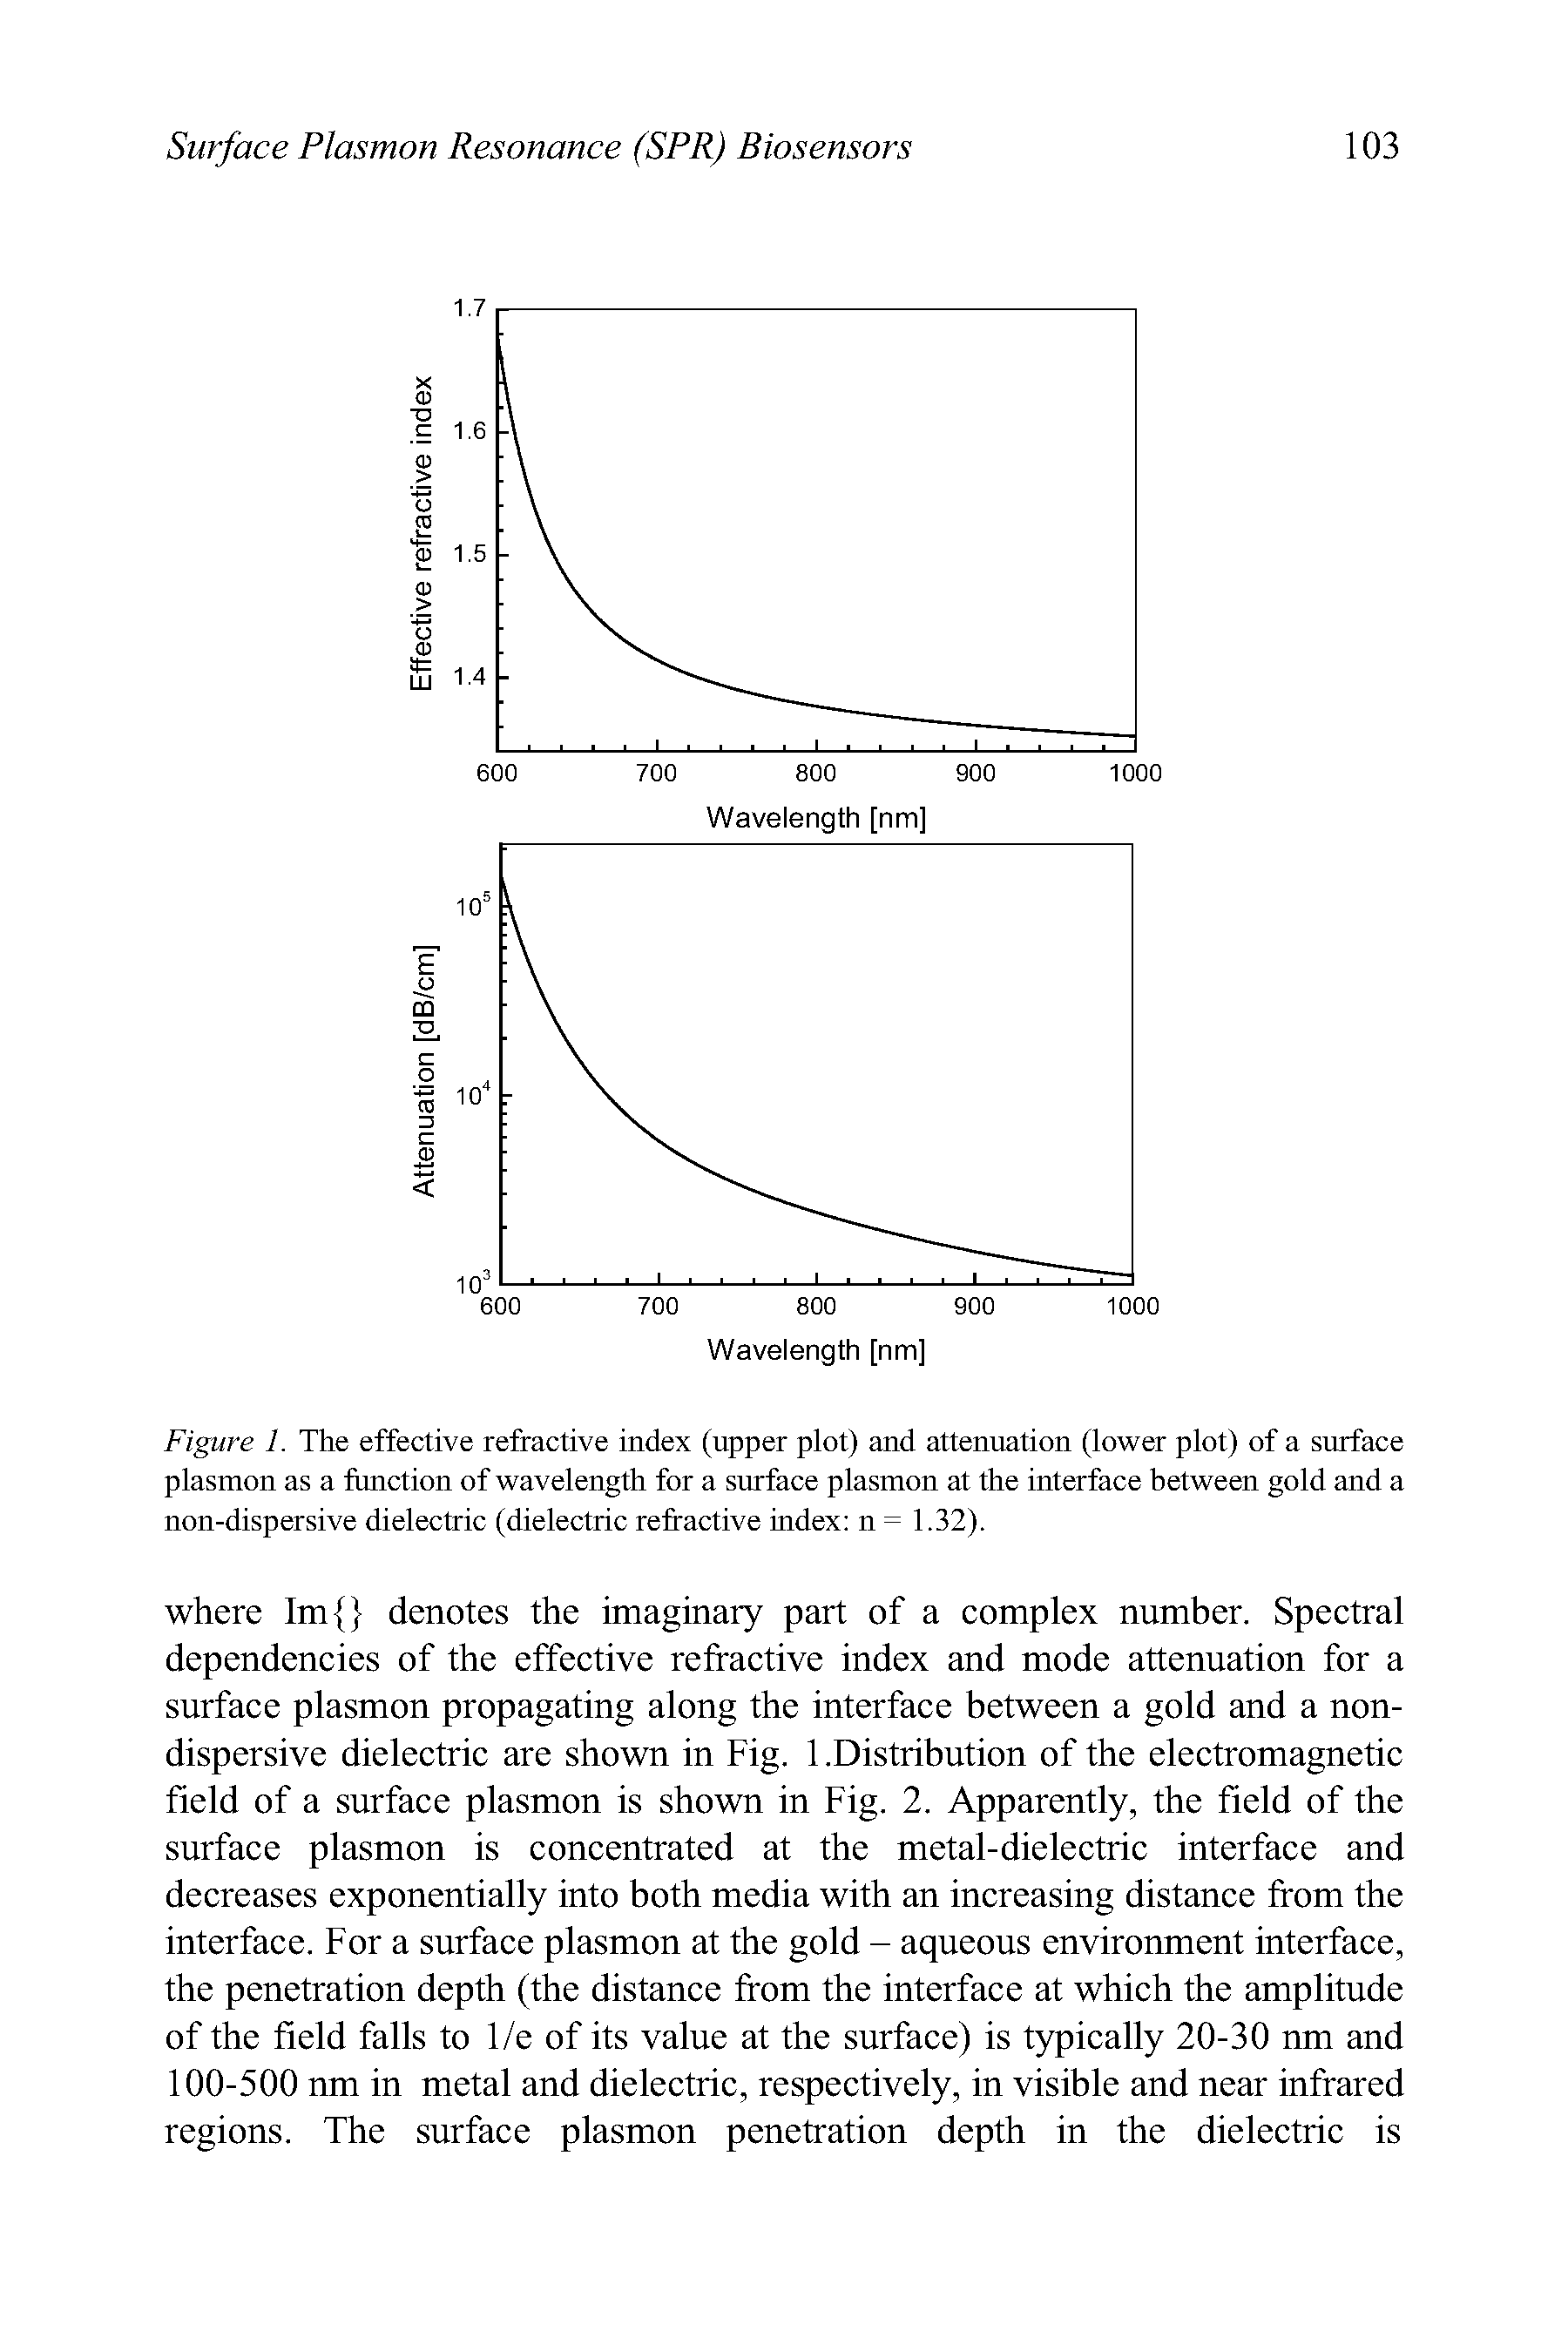 Figure 1. The effective refractive index (upper plot) and attenuation (lower plot) of a surface plasmon as a function of wavelength for a surface plasmon at the interface between gold and a non-dispersive dielectric (dielectric refractive index n = 1.32).